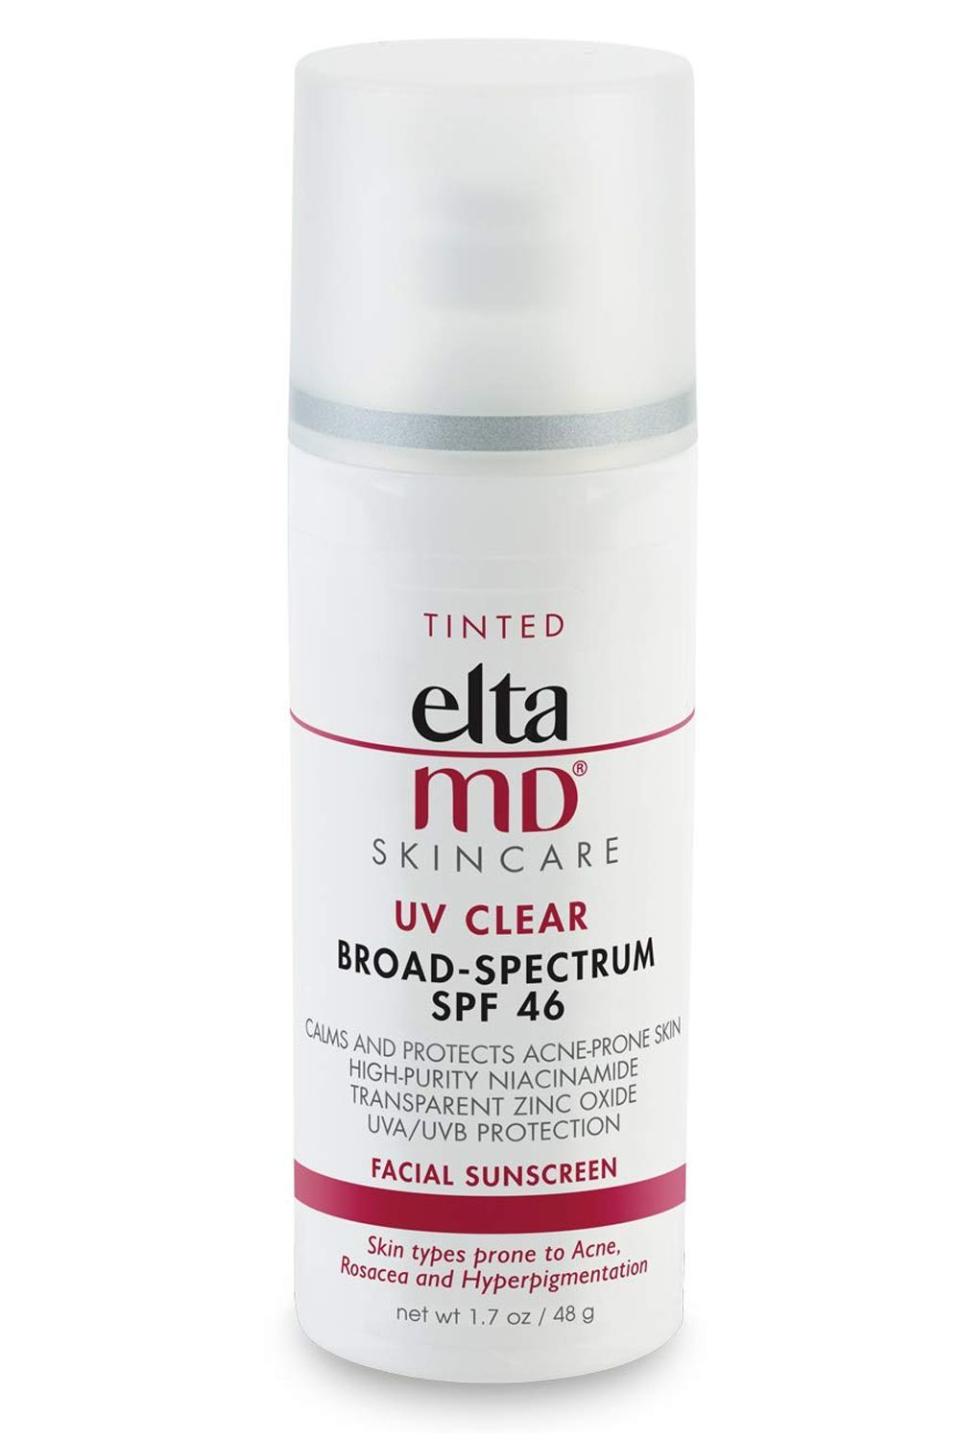 5) EltaMD UV Clear Tinted Face Sunscreen